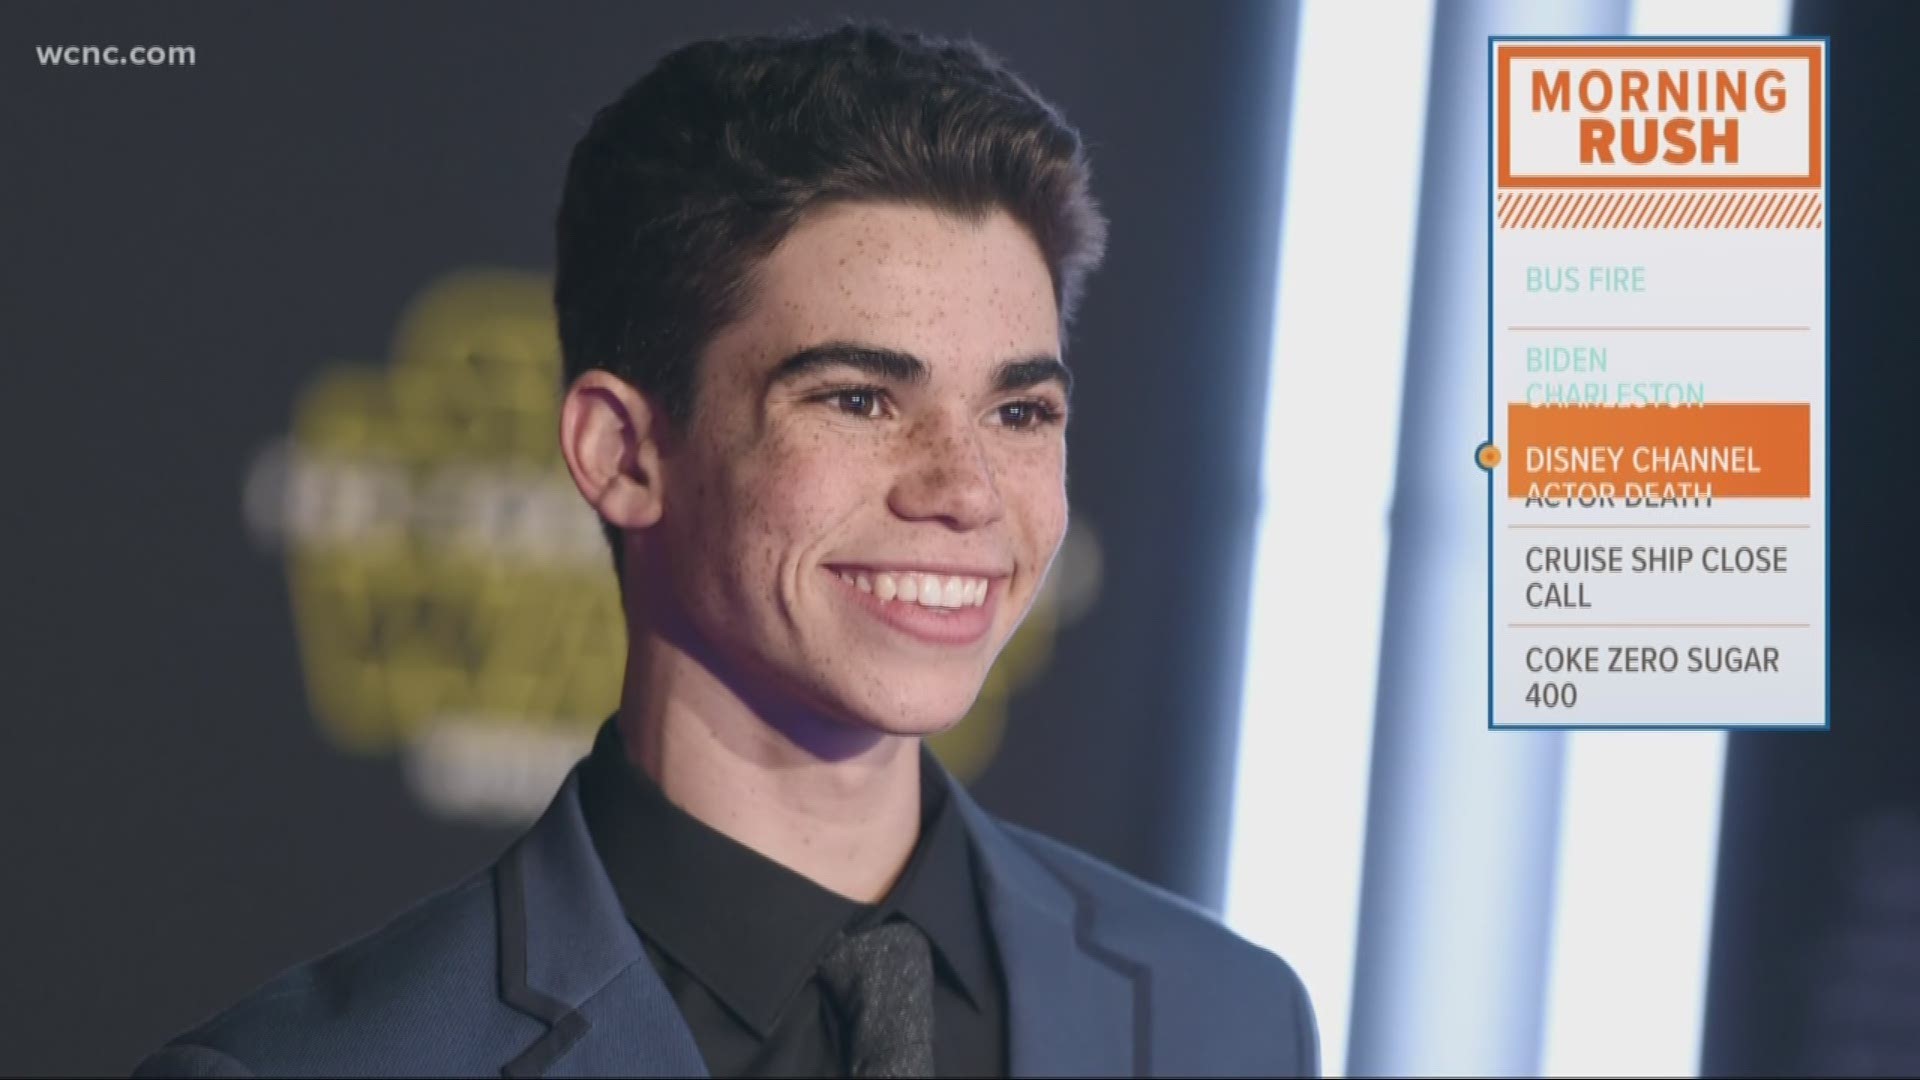 Disney Channel actor Cameron Boyce has died at the age of 20. According to his family, Boyce suffered a seizure in his sleep. He was best known for his role on the hit show "Jessie."